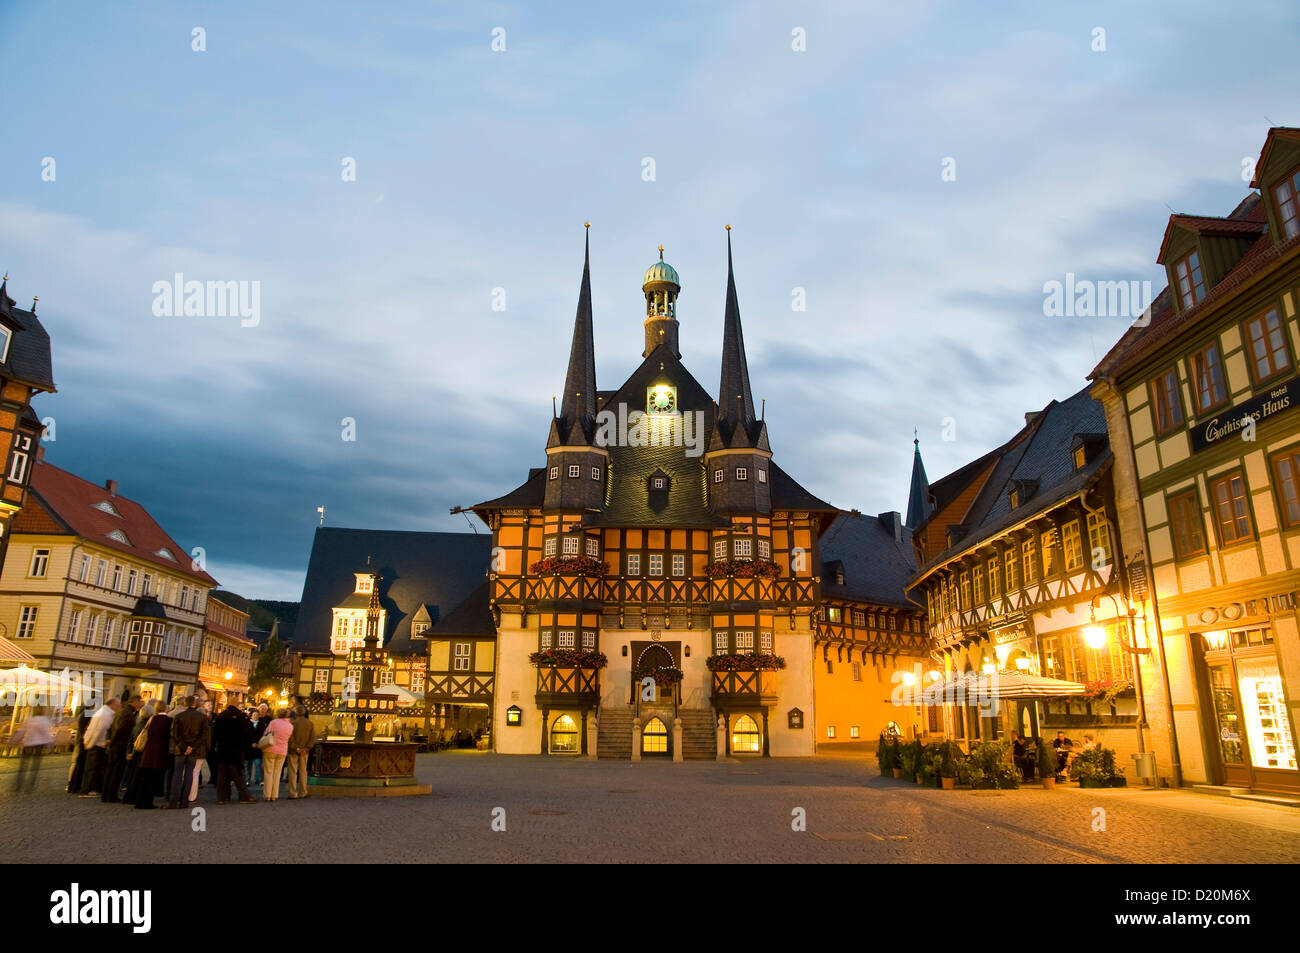 Market square and guild hall at dusk, Wernigerode, Harz, Saxony-Anhalt, Germany Stock Photo